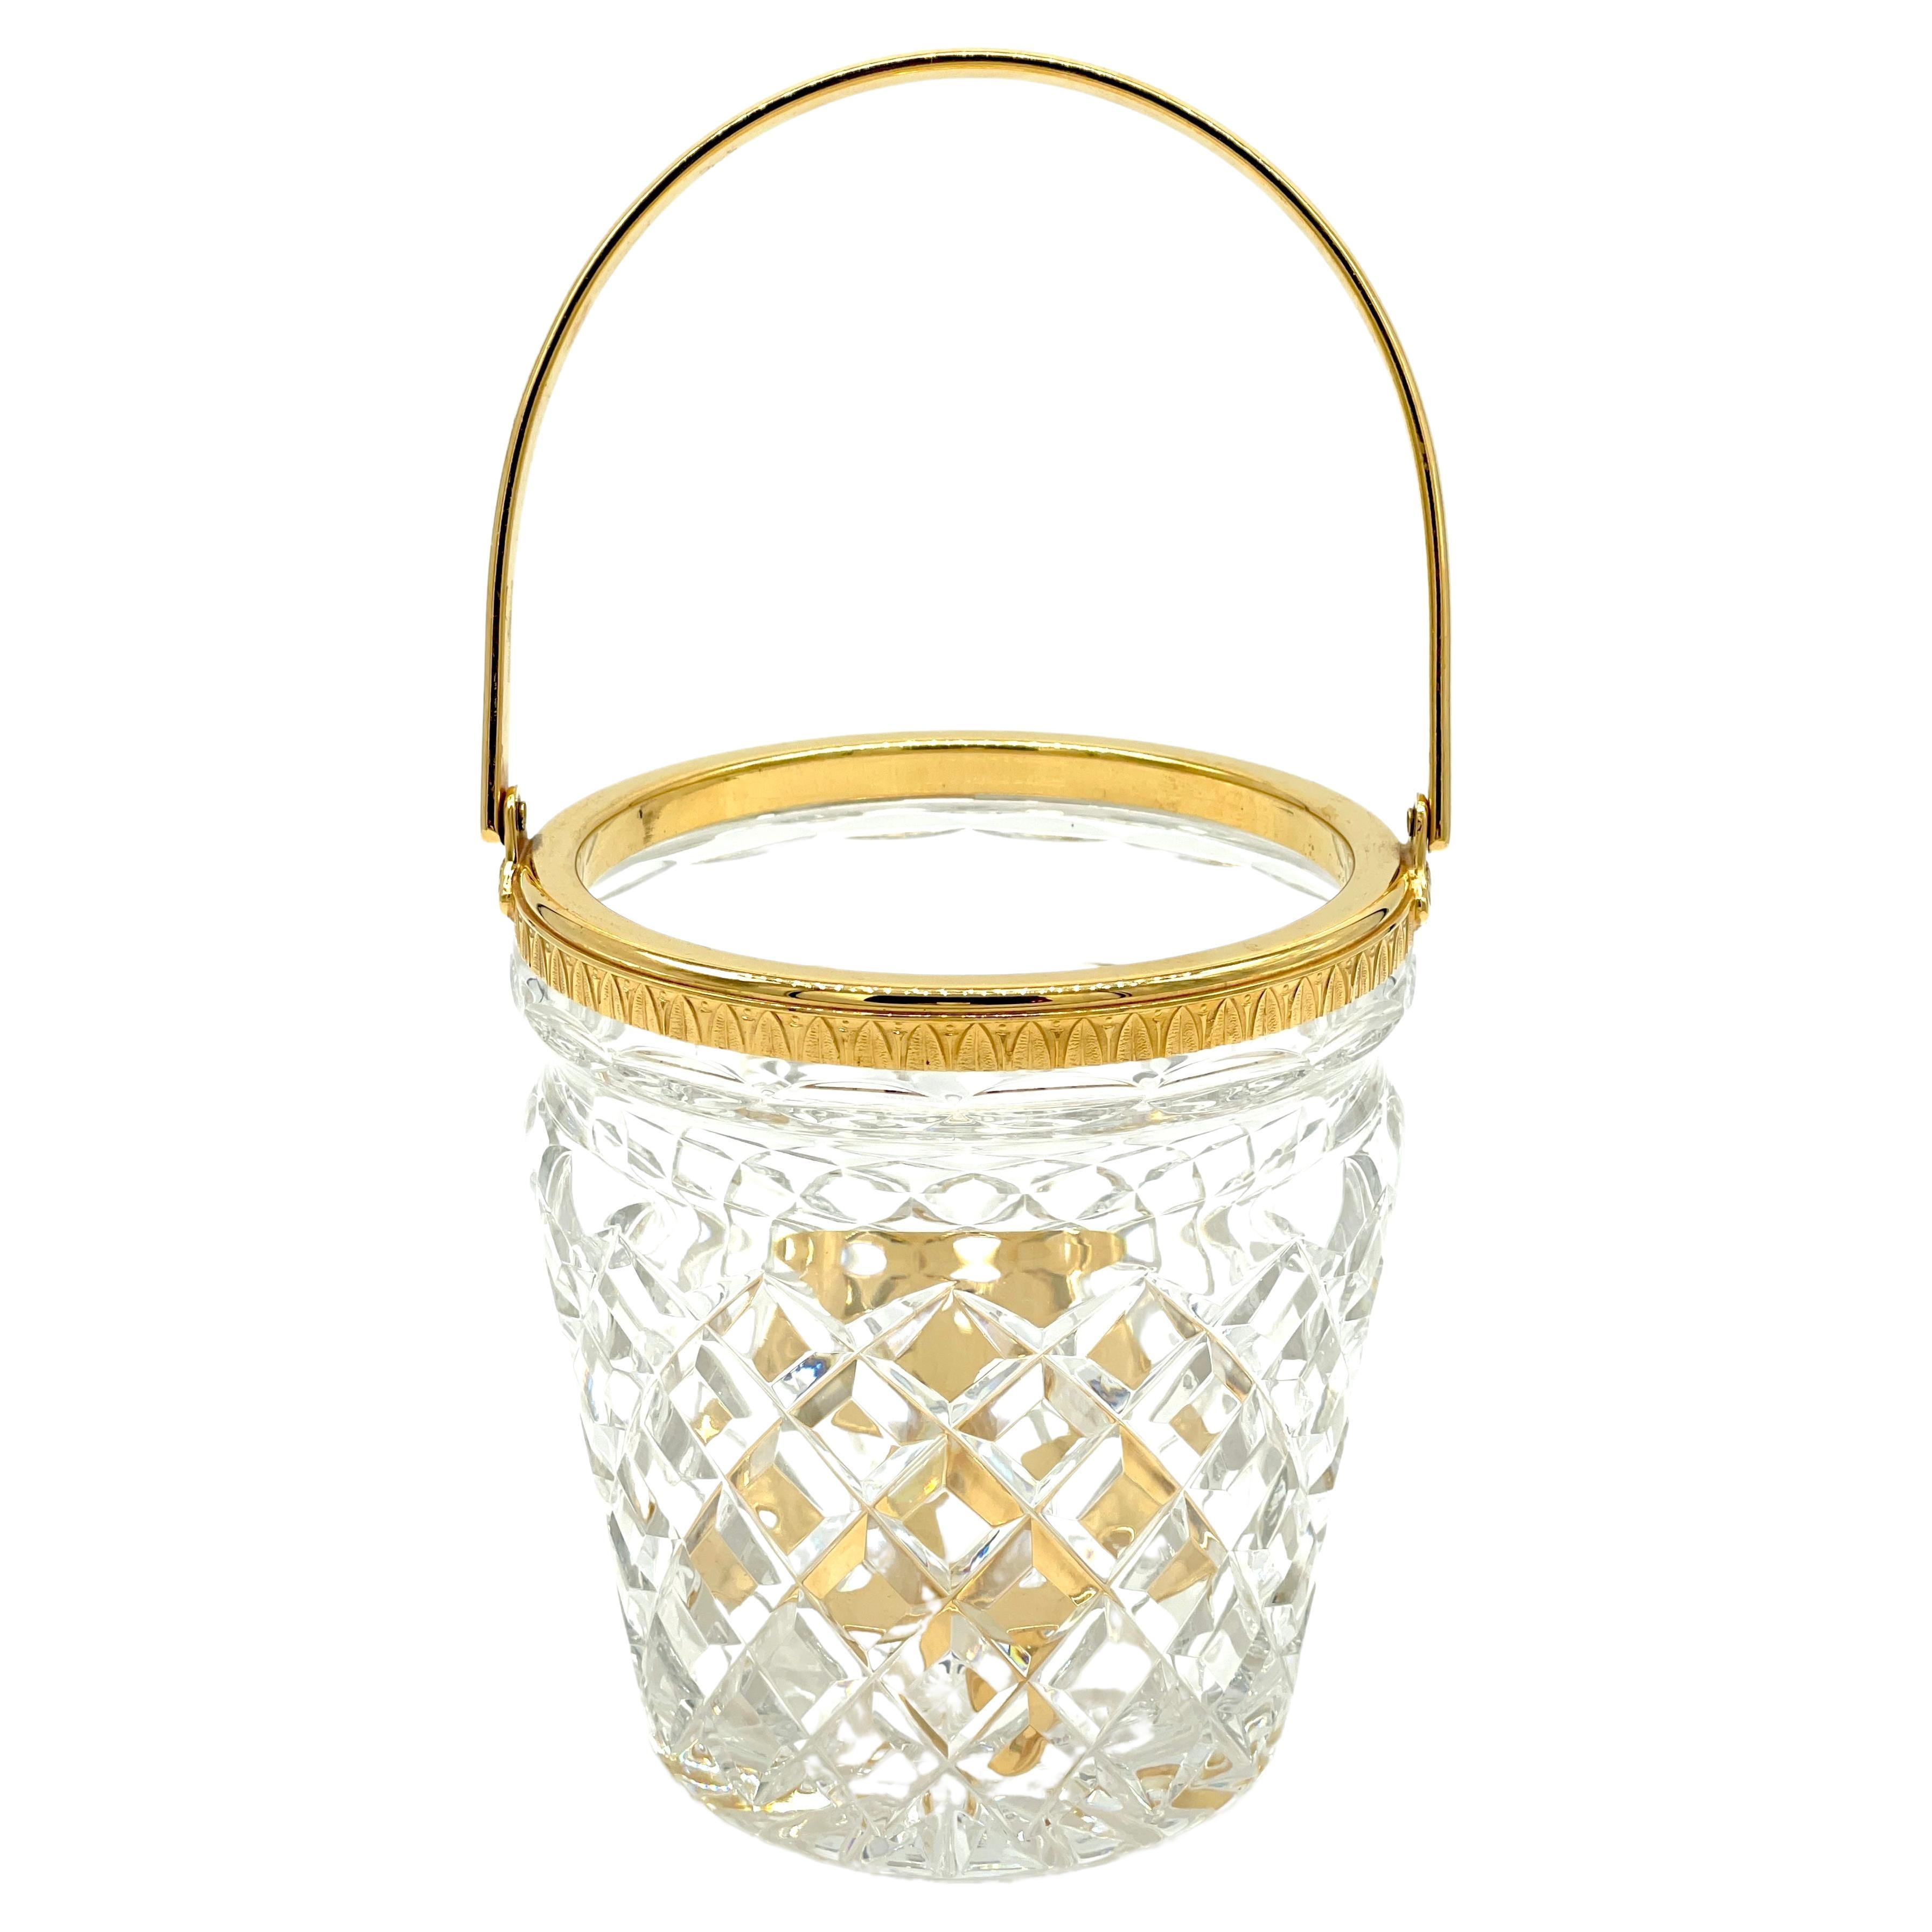  Christofle Neocalssical Cut Crystal Gold Washed Swing -Handled Ice Bucket For Sale